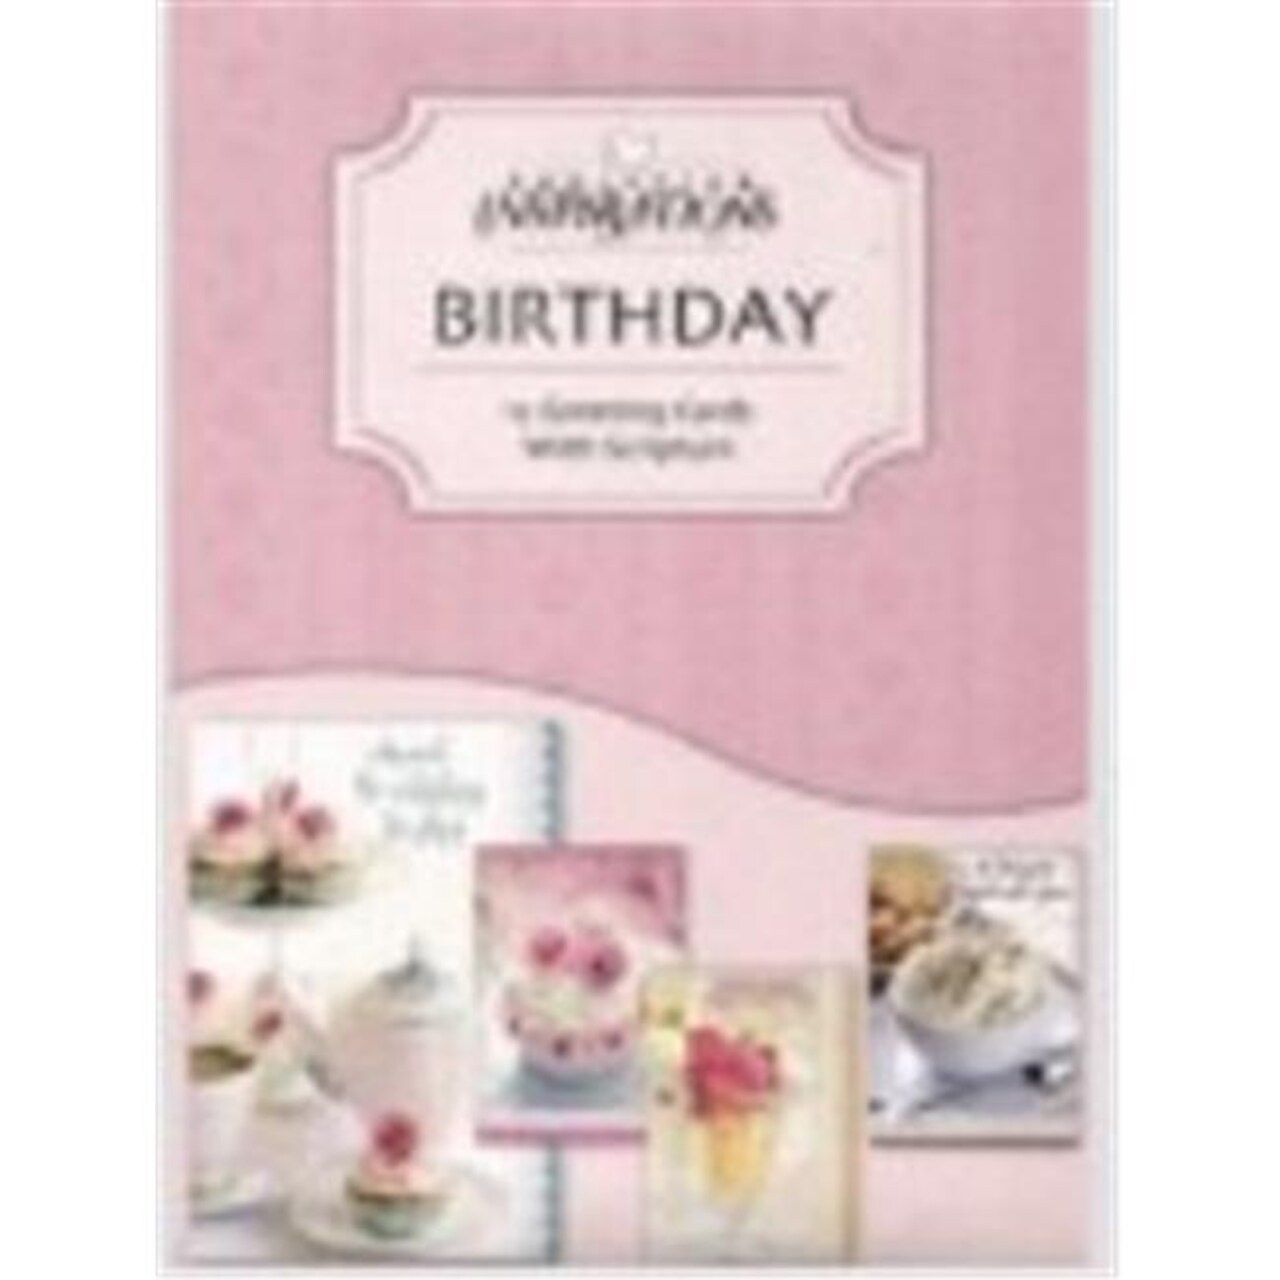 Faithfully Yours 165258 Birthday-Special Blessing Boxed Card - Box of 12